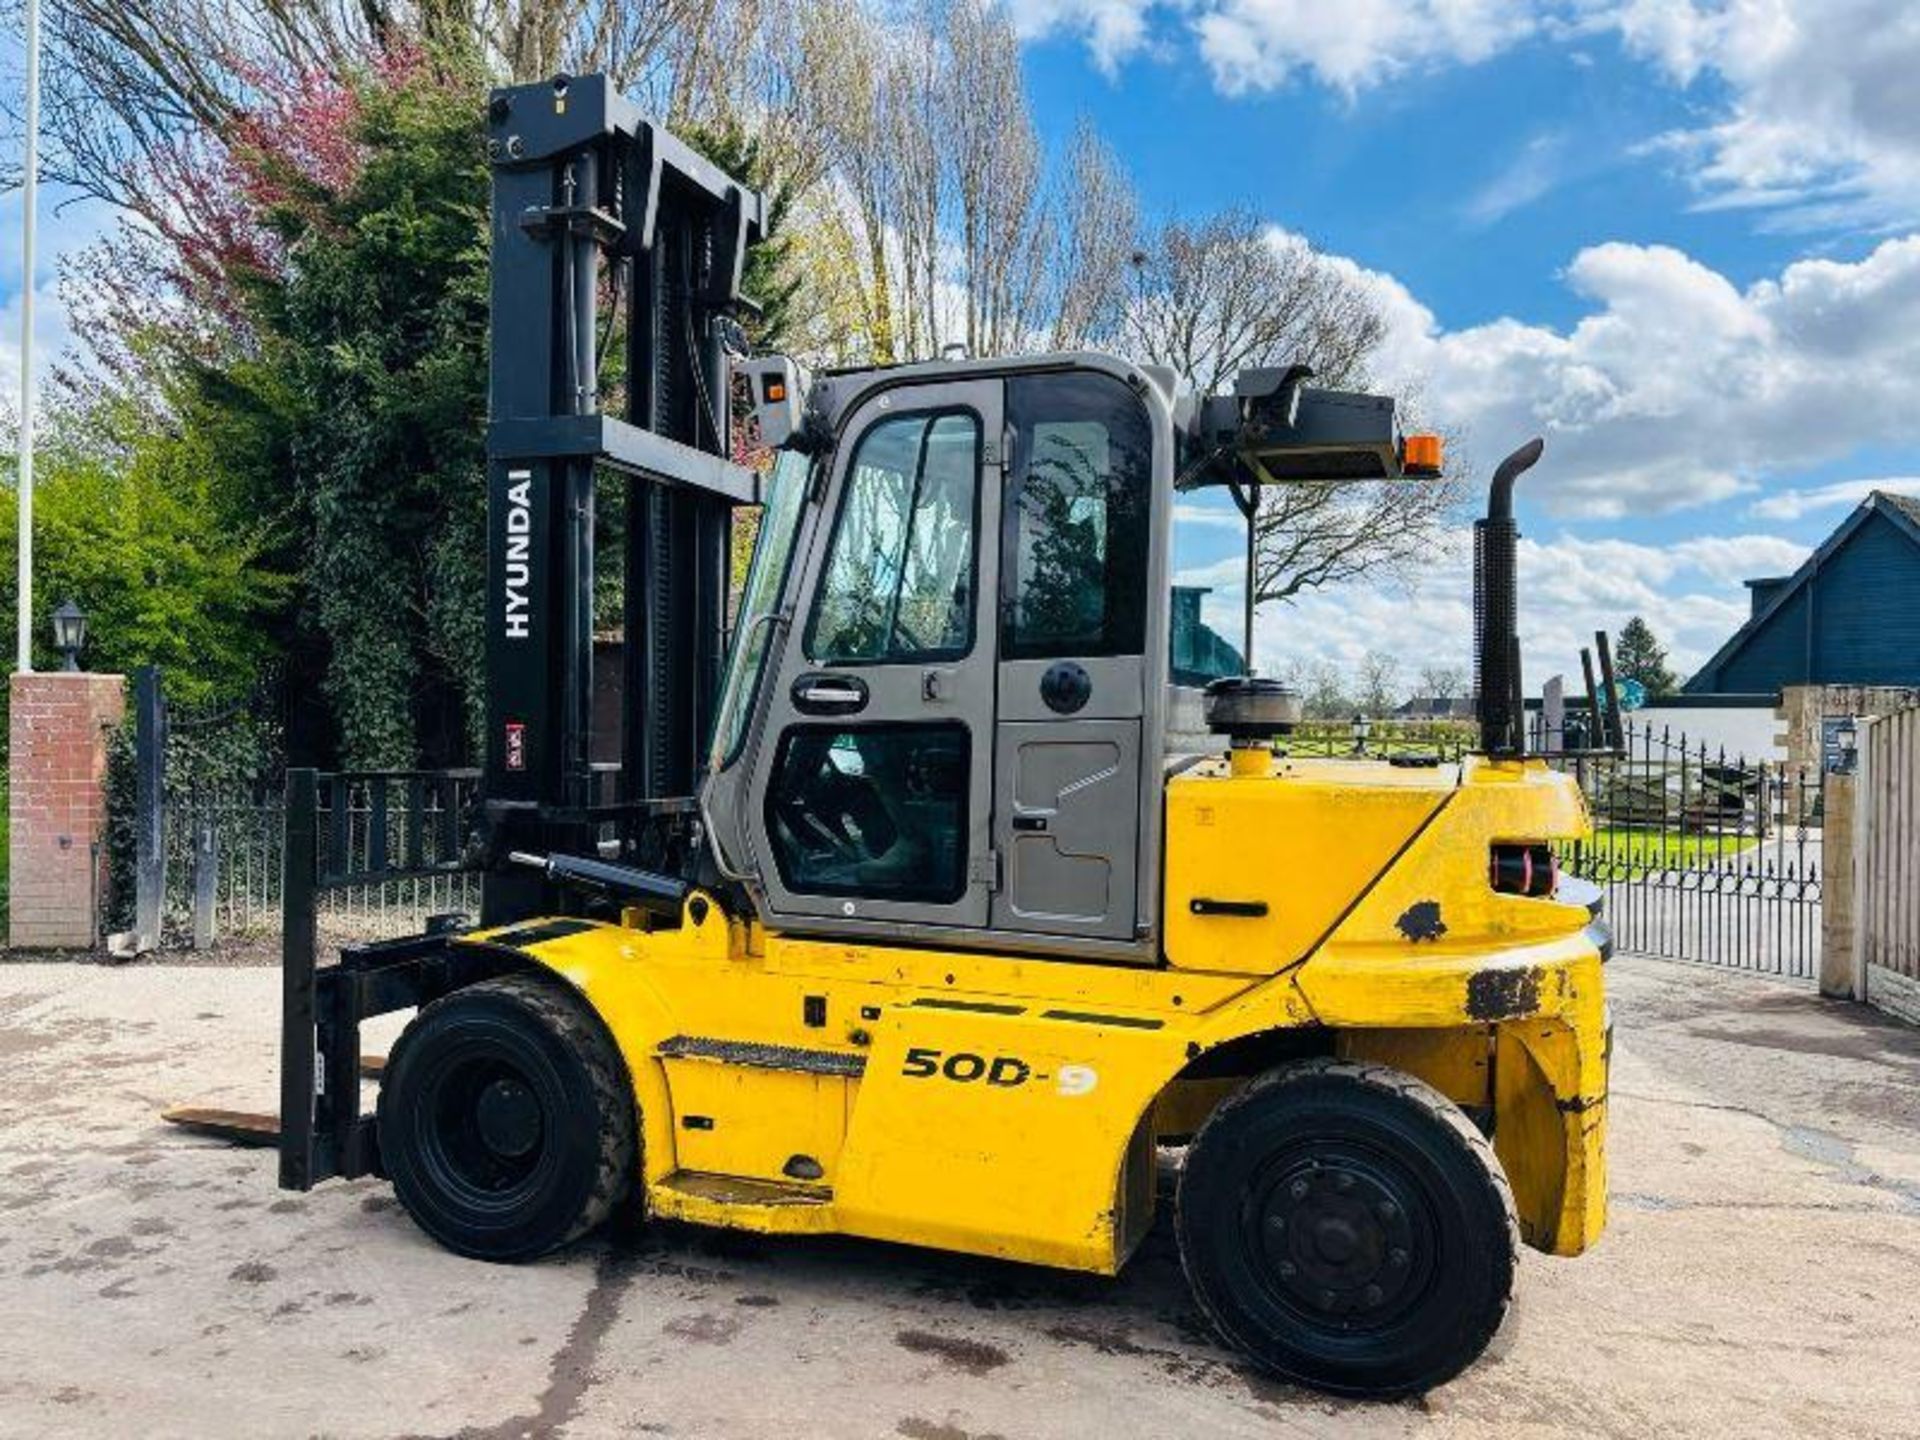 HYUNDAI 50D-9 DIESEL FORKLIFT *YEAR 2016, 5 TON LIFT* C/W SIDE SHIFT - Image 7 of 19